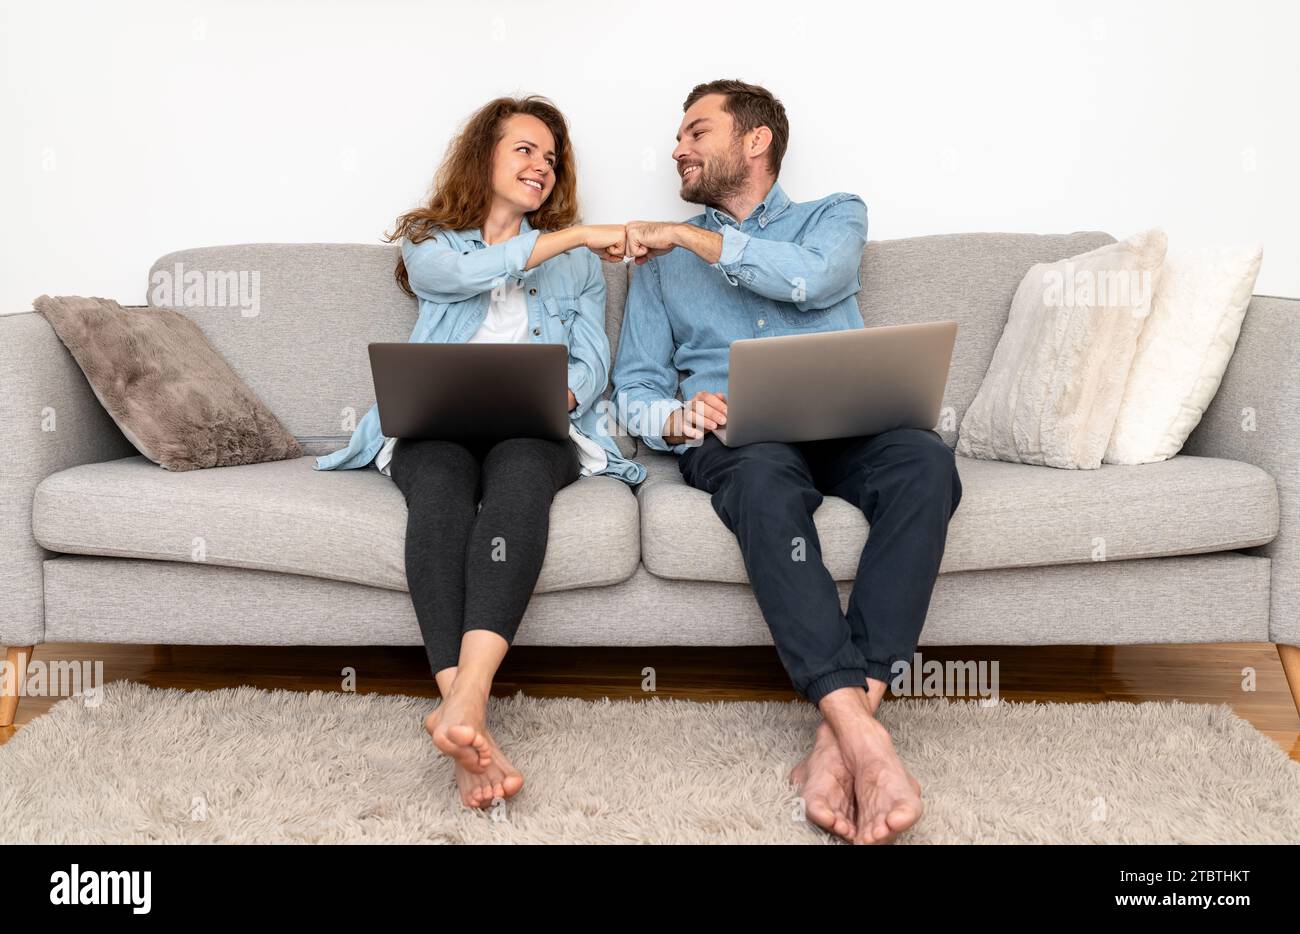 Couple working on laptops at home and fist bumping. Mutual understanding and teamwork in the family. Stock Photo